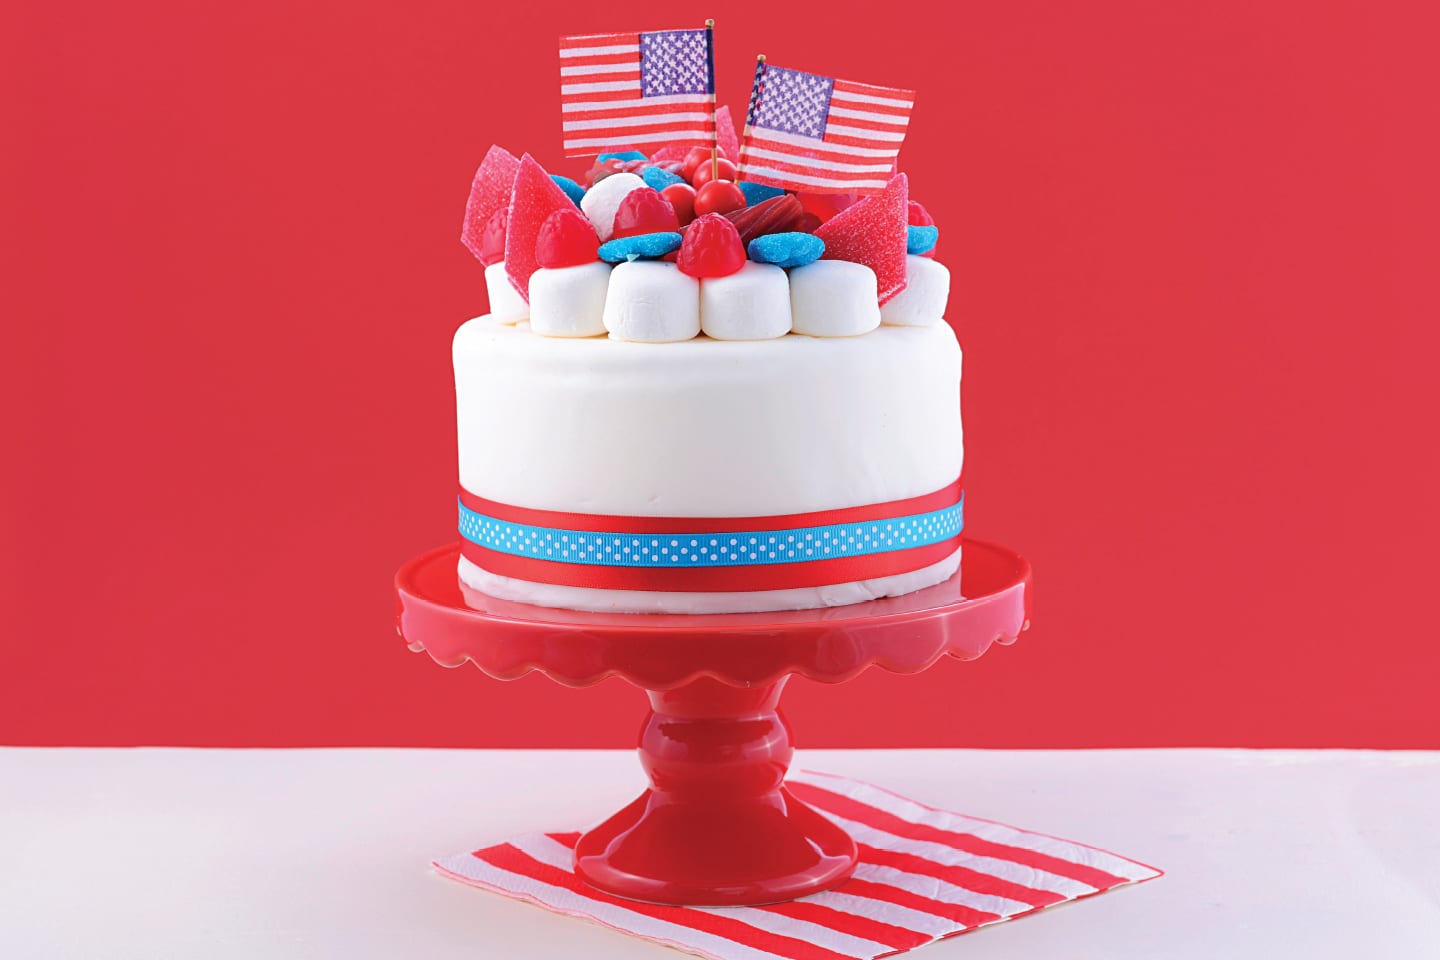 Cake decorated in red, white and blue with American flags on top